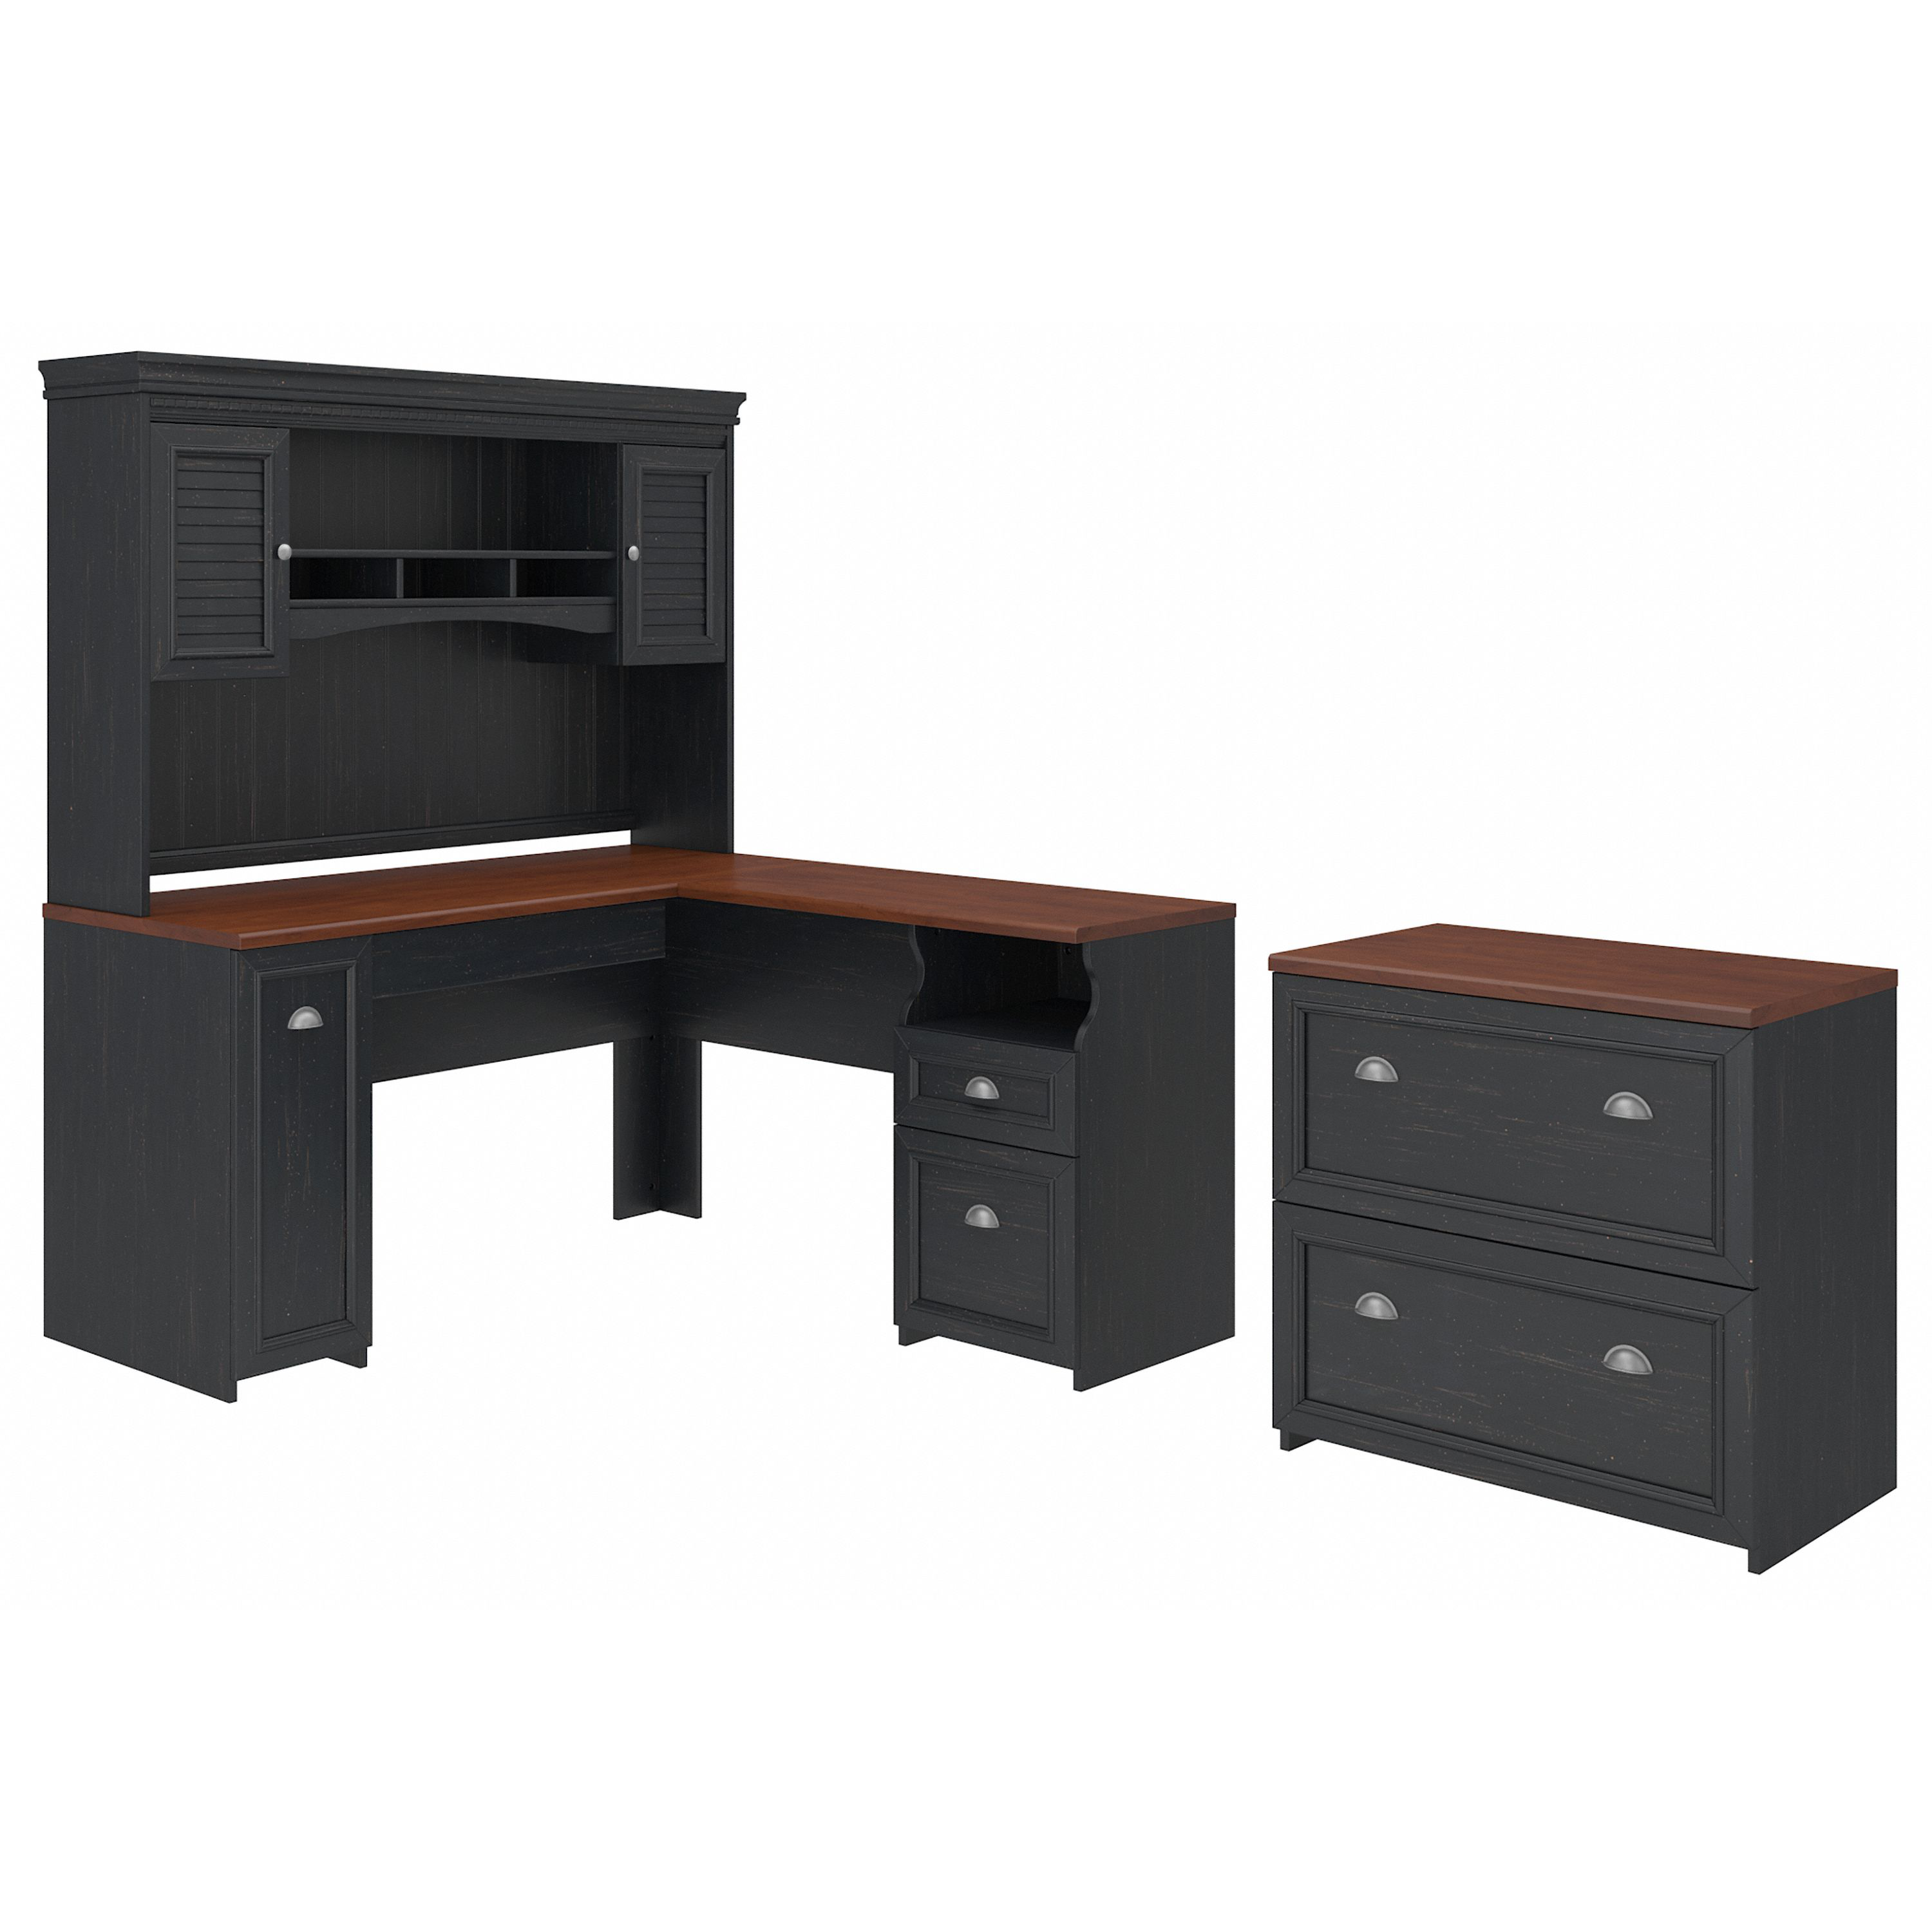 Shop Bush Furniture Fairview L Shaped Desk with Hutch and Lateral File Cabinet 02 FVW001 #color_antique black/hansen cherry